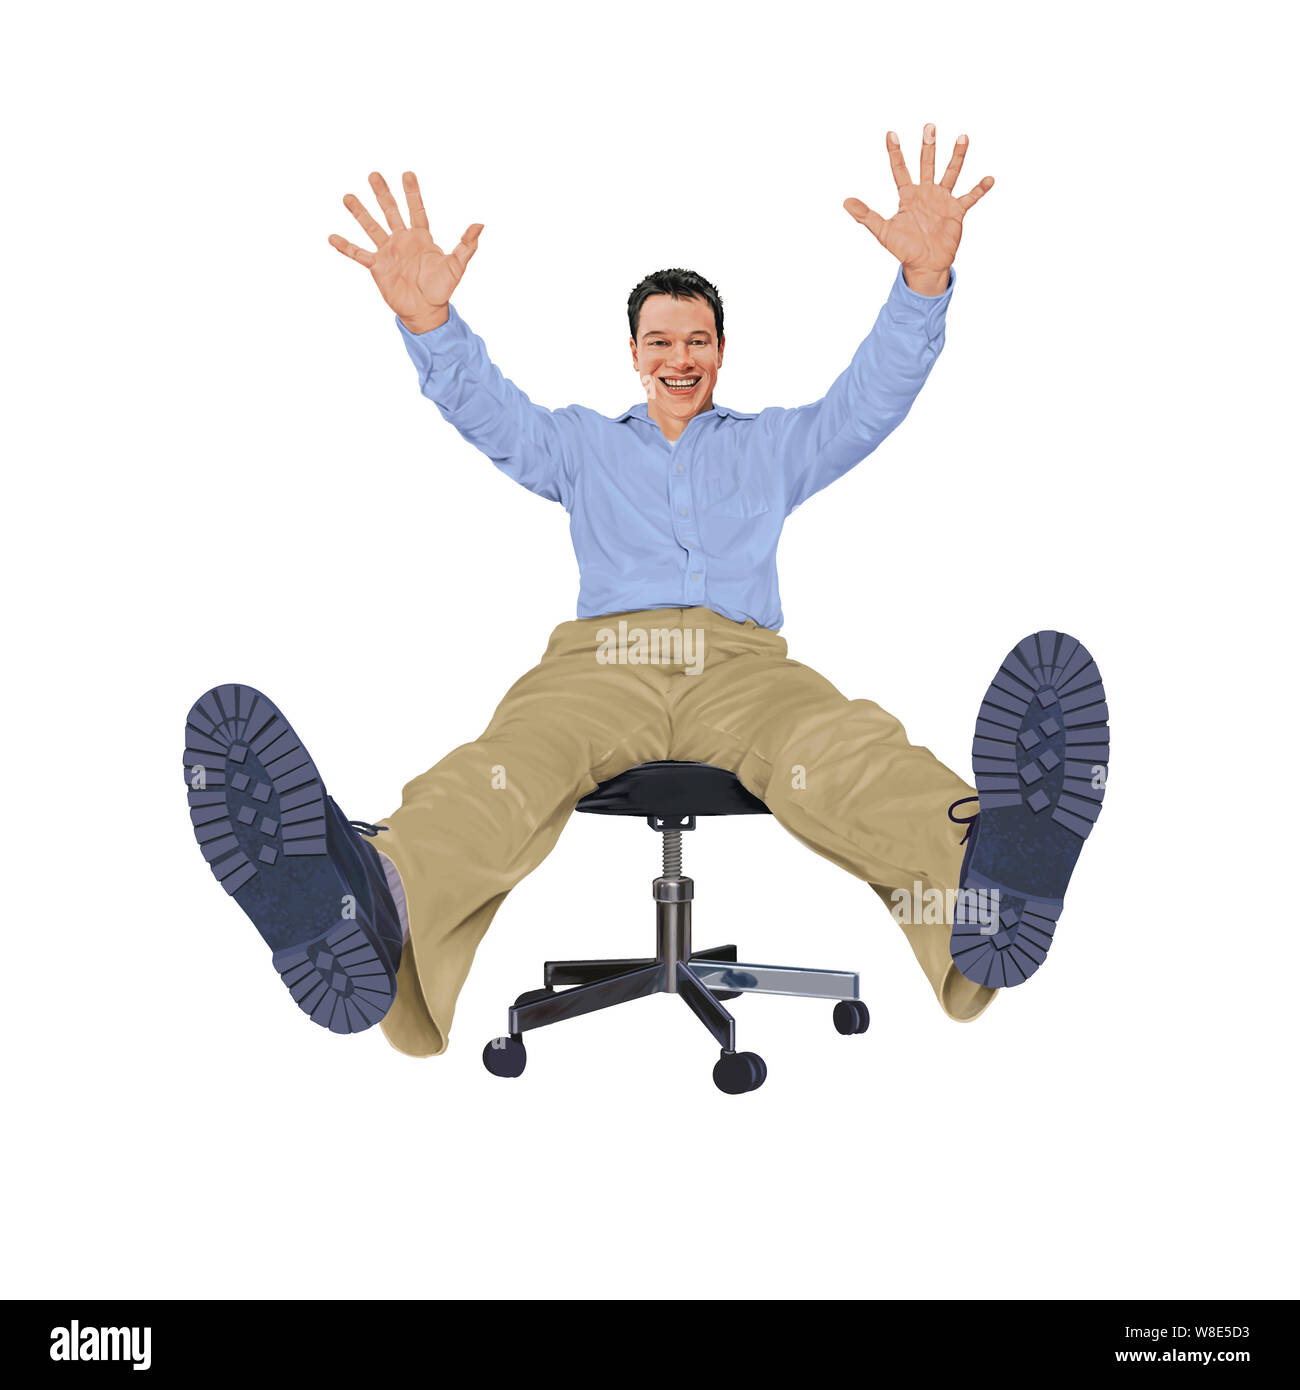 Hands & feet which is the french form of the expression 'jump through hoops' with a smiling man on a rolling office chair holding up his hands & feet Stock Photo